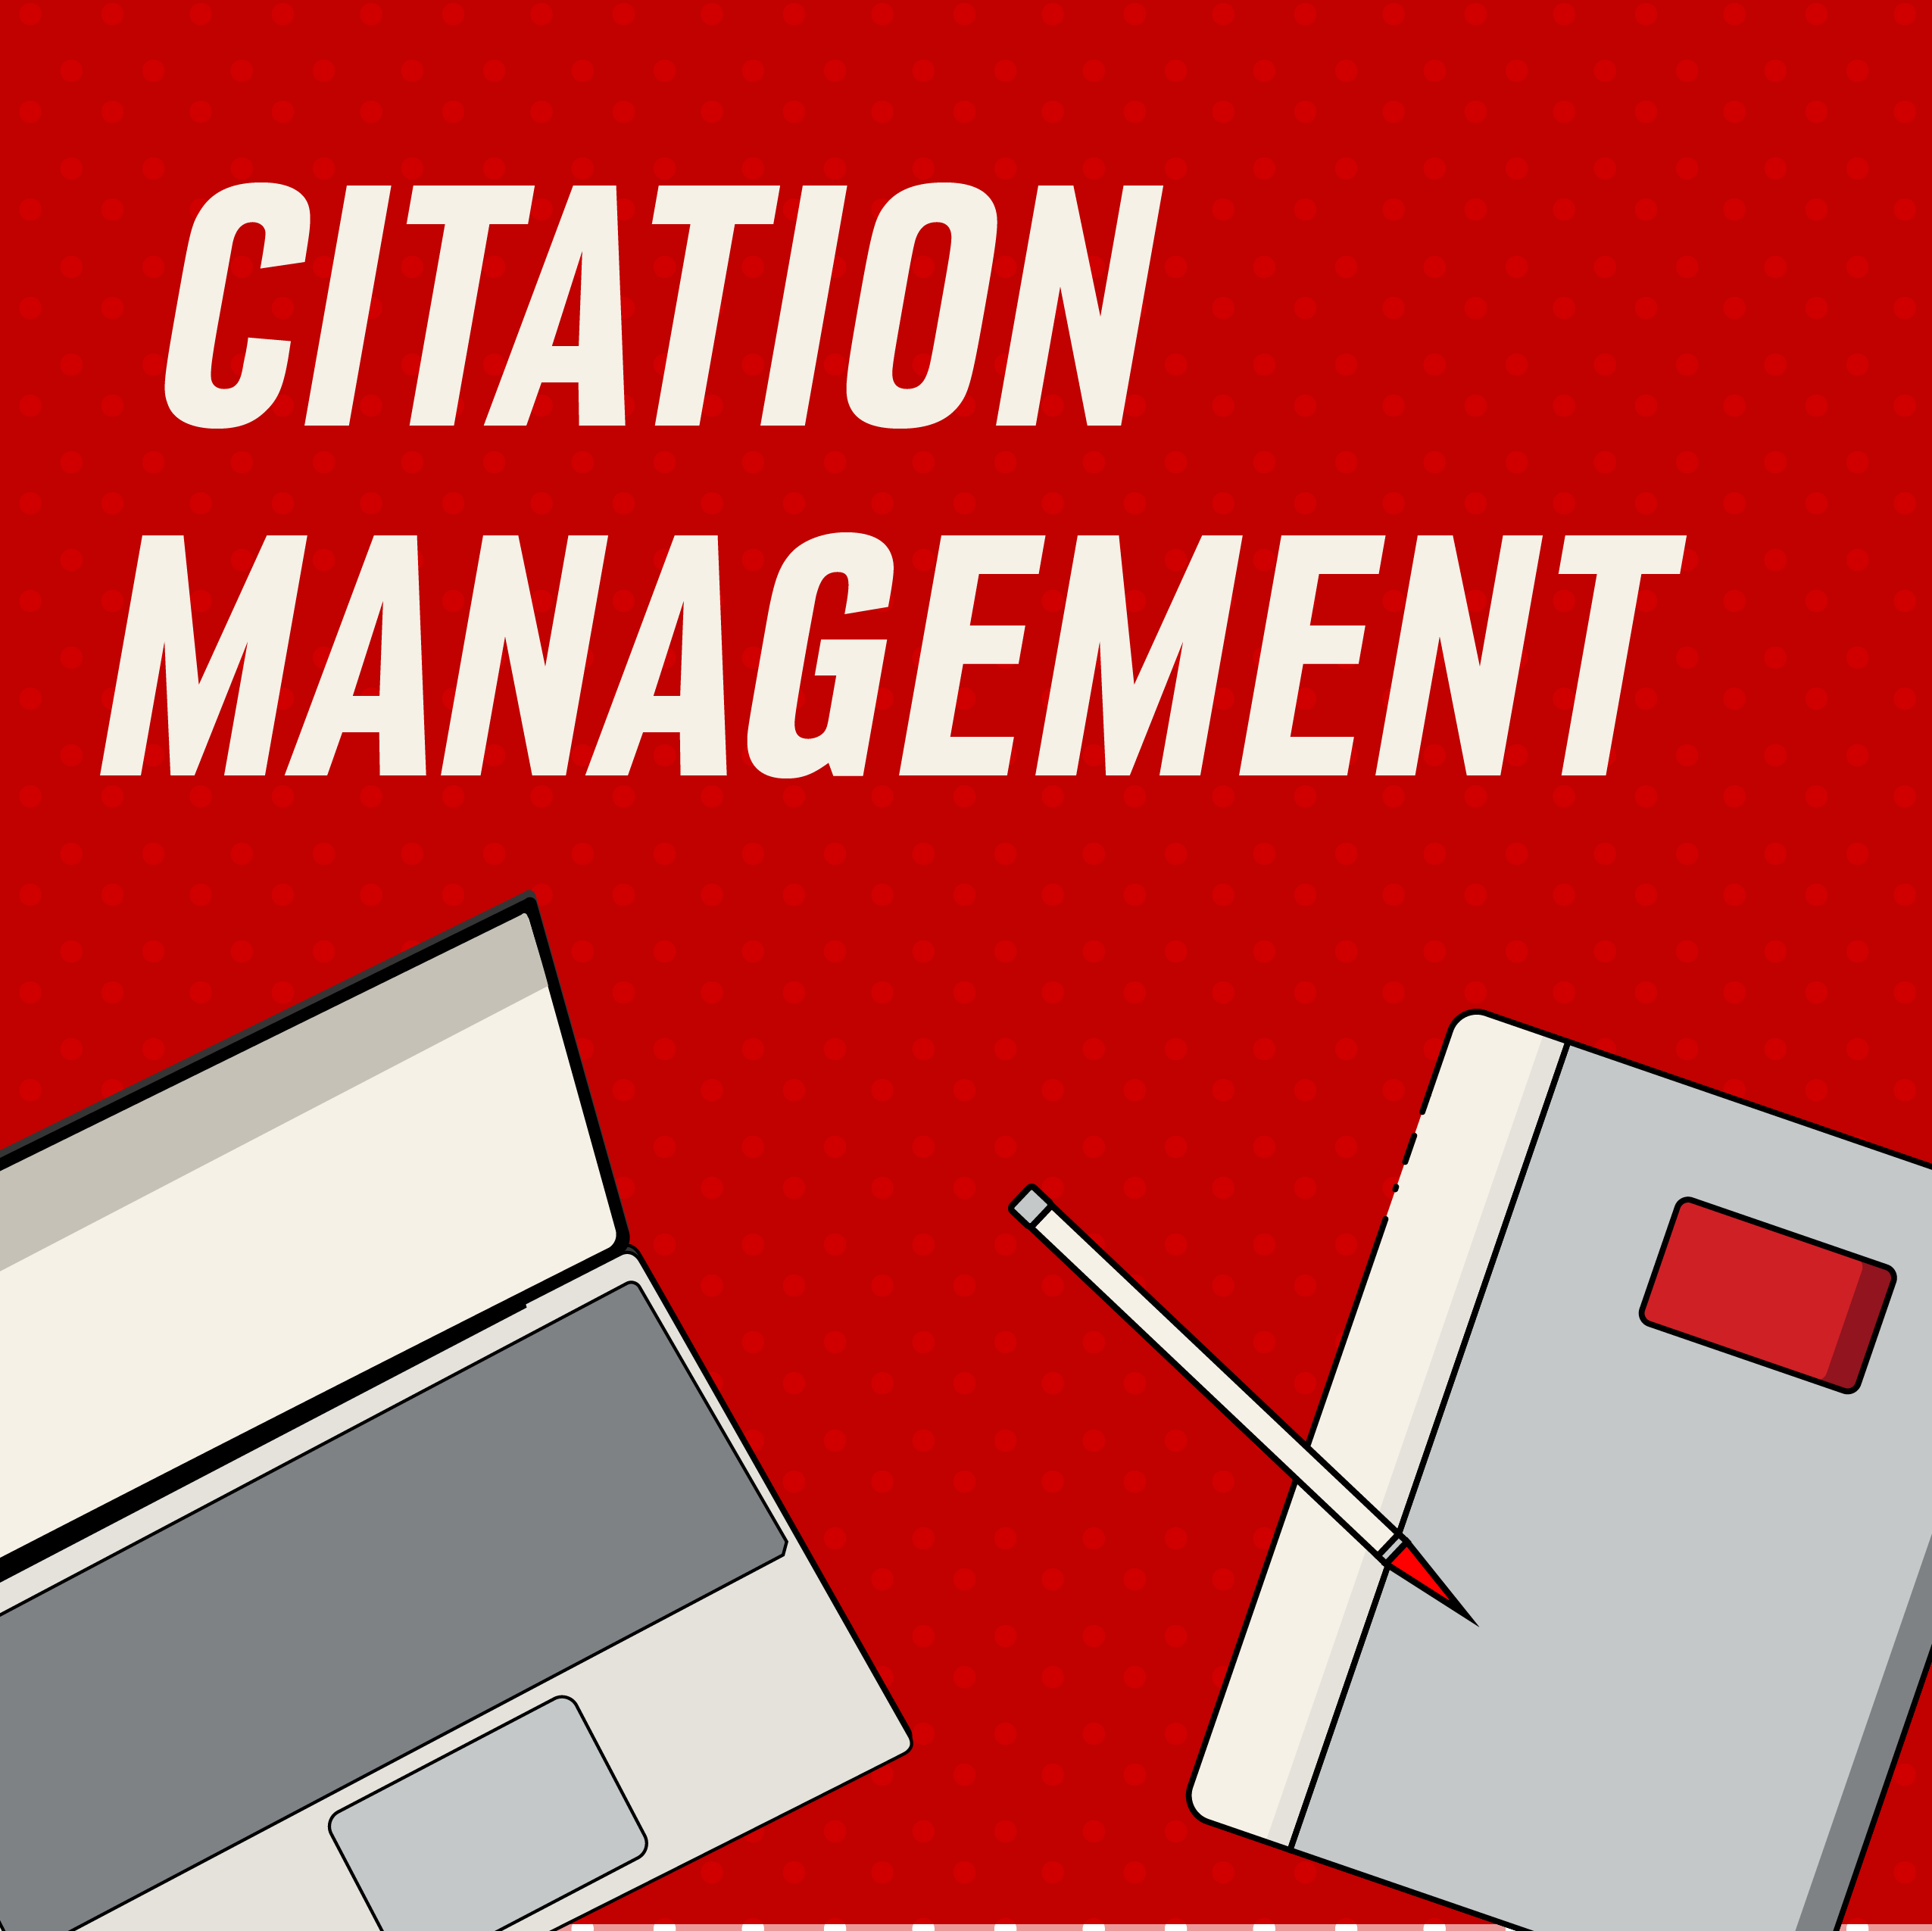 Learn Zotero to manage your citations in this online session with librarian, Erica DeFrain